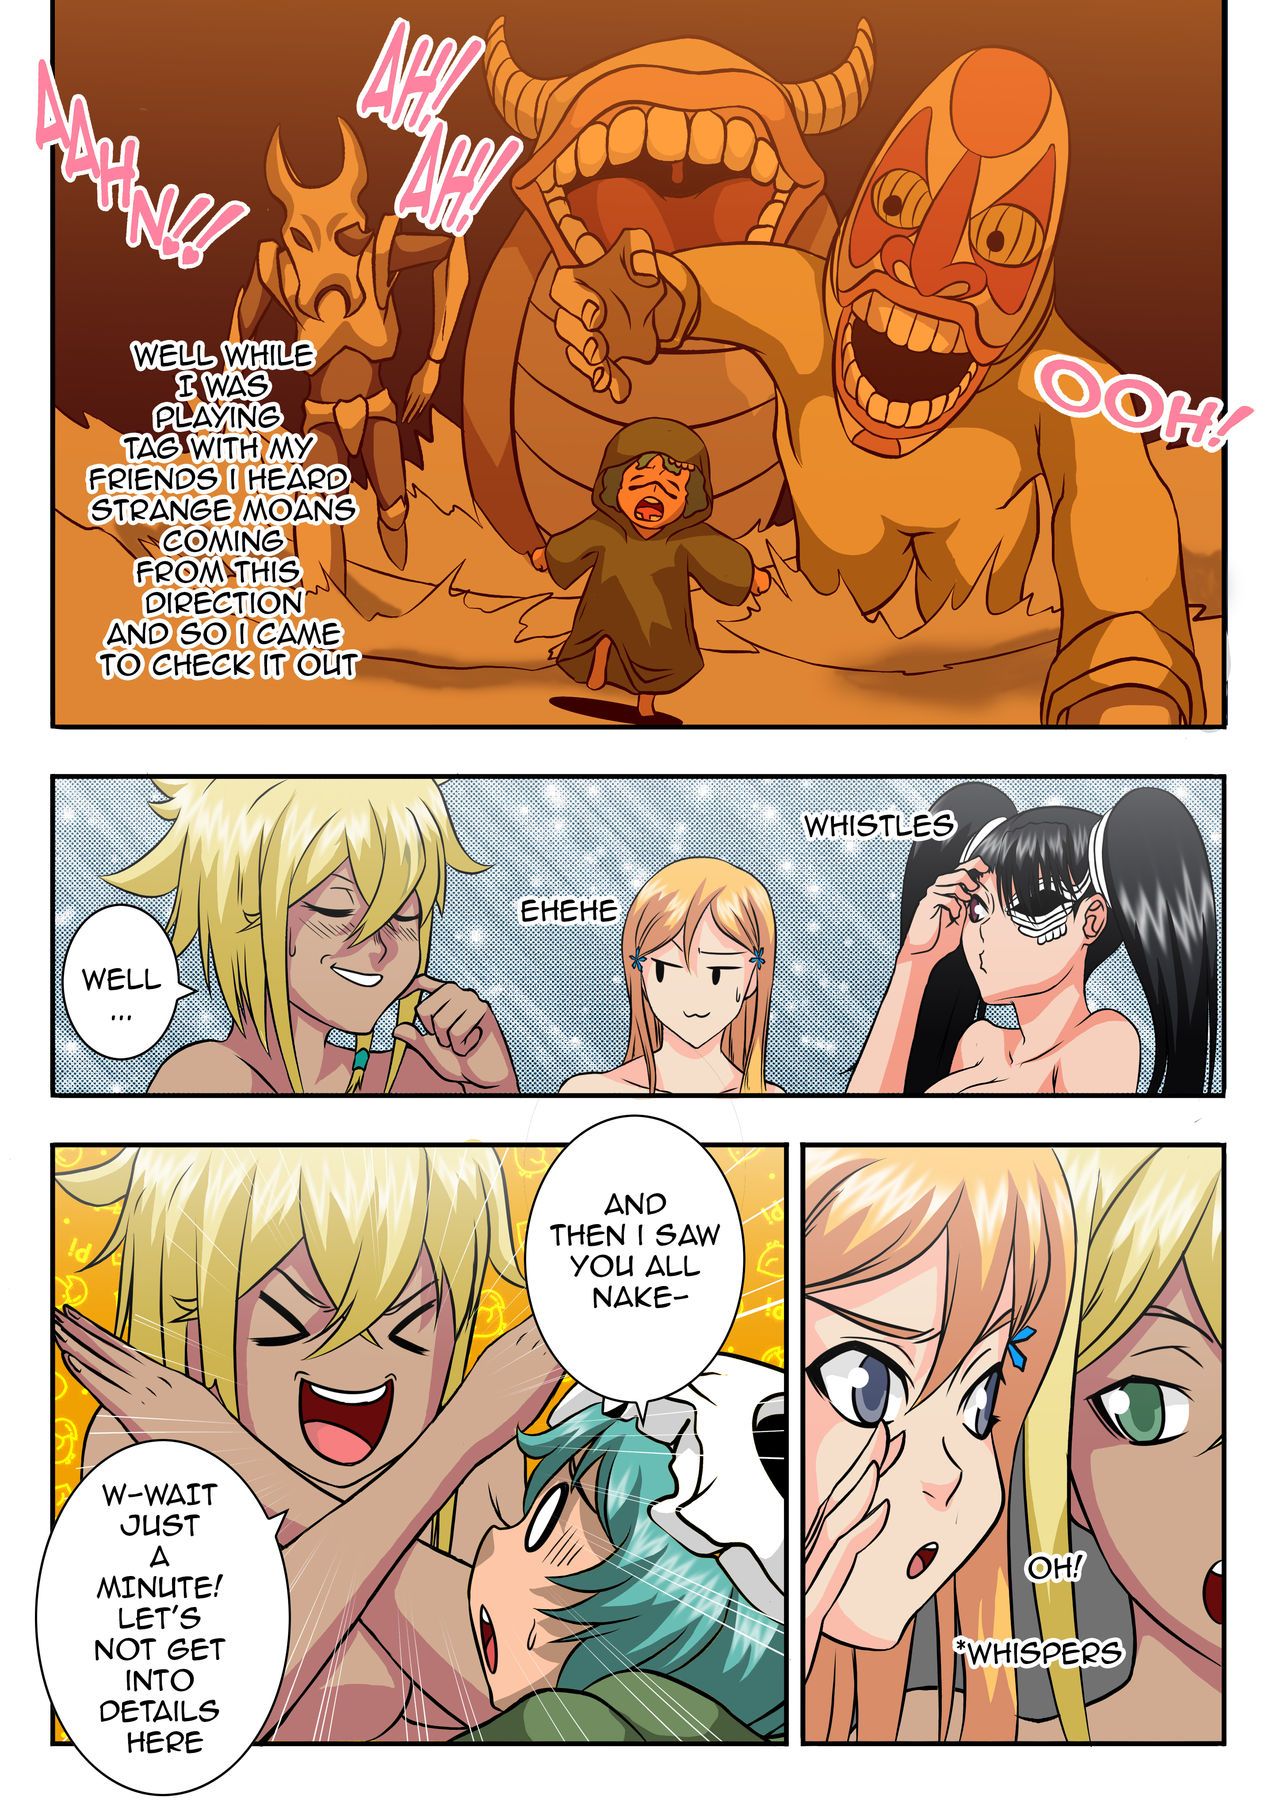 Bleach: A What If Story Part 4 Porn Comic english 40